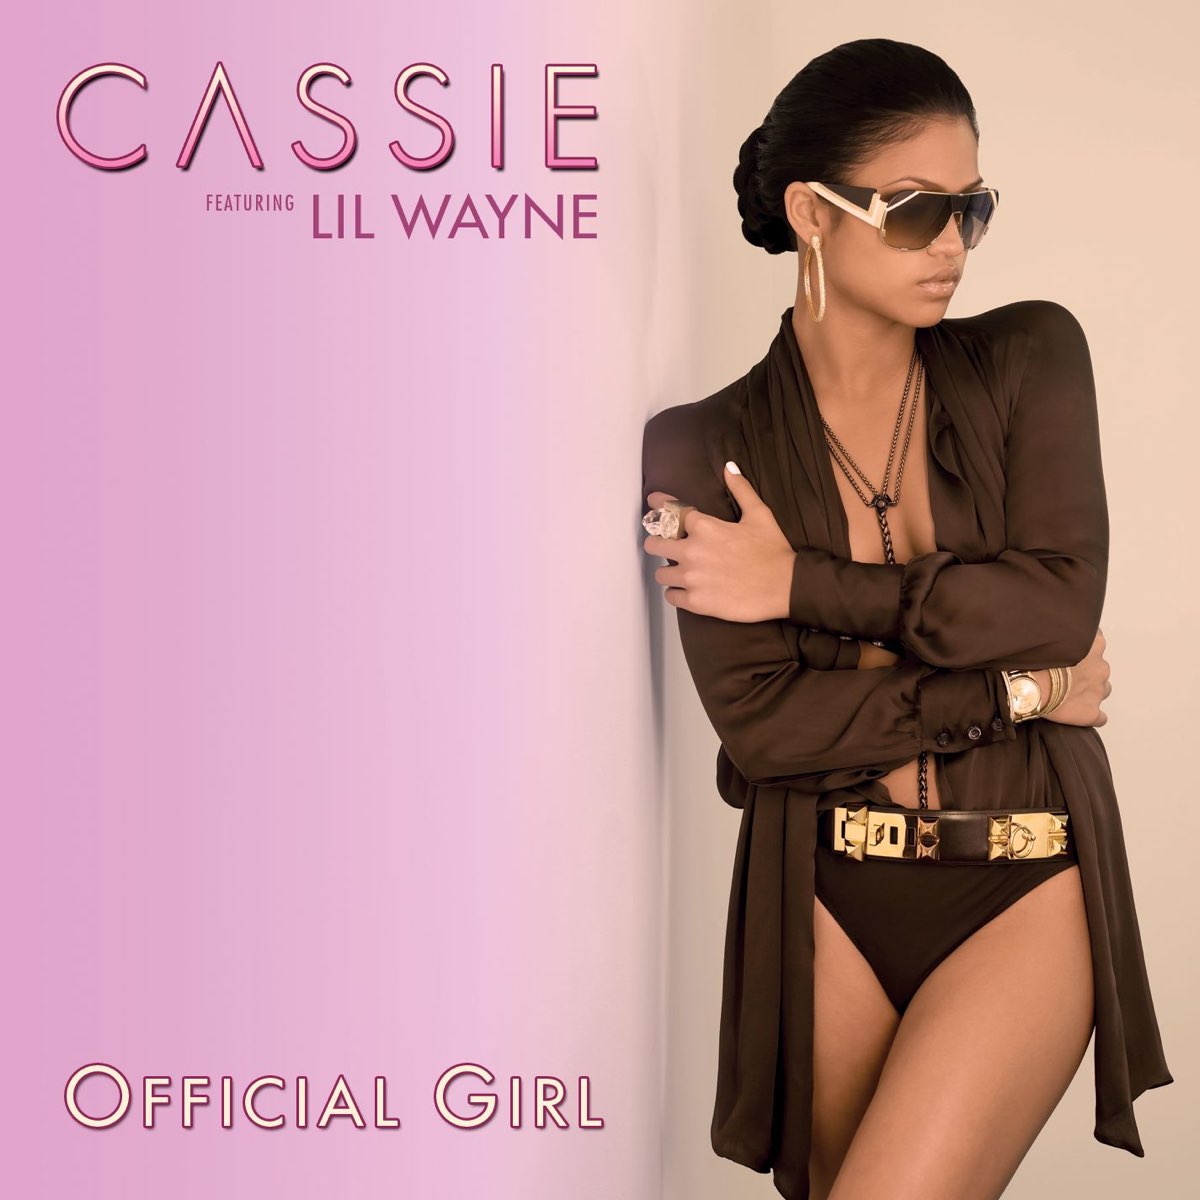 Cassie ft. featuring Lil Wayne Official Girl cover artwork